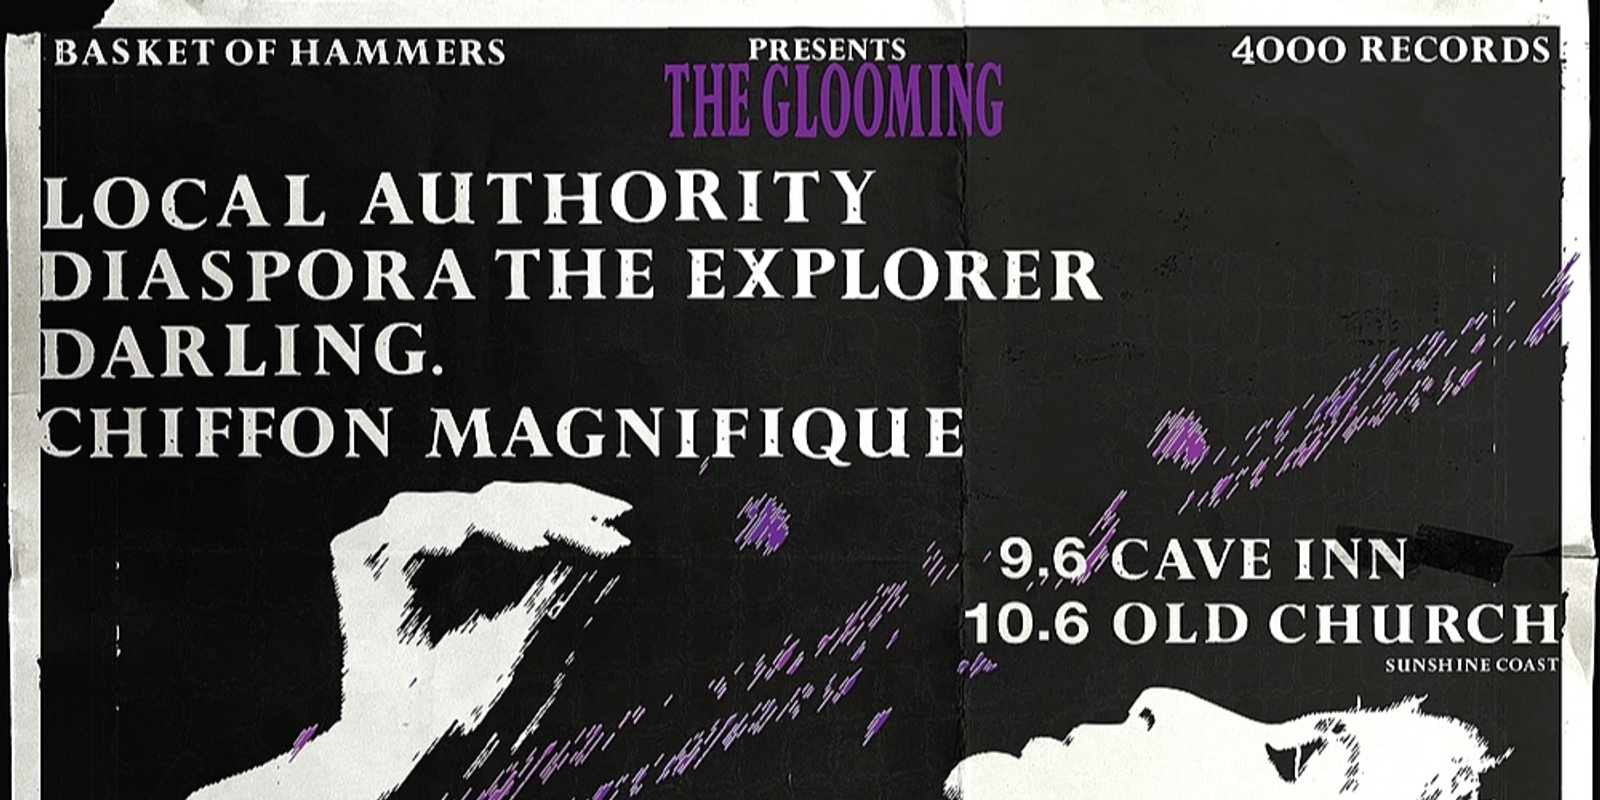 Banner image for THE GLOOMING w/ Local Authority, Diaspora The Explorer, Chiffon Magnifique, DARLING. [OLD CHURCH]